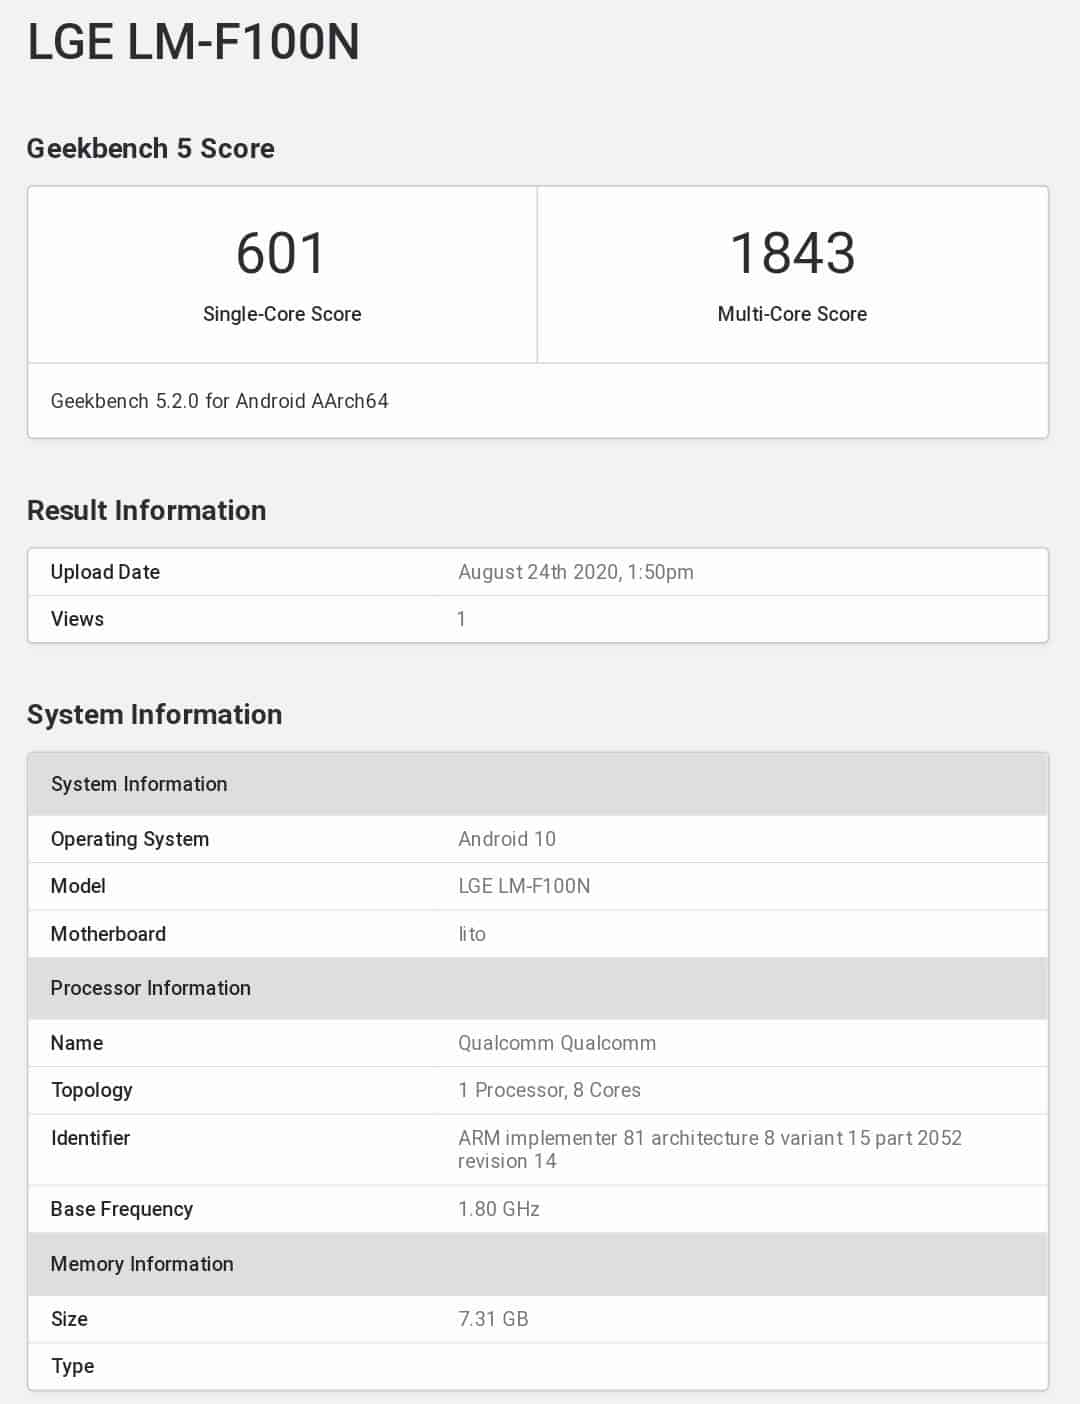 LG Horizontal Instinct smartphone with 8GB RAM and Snapdragon 76G spotted on Geekbench